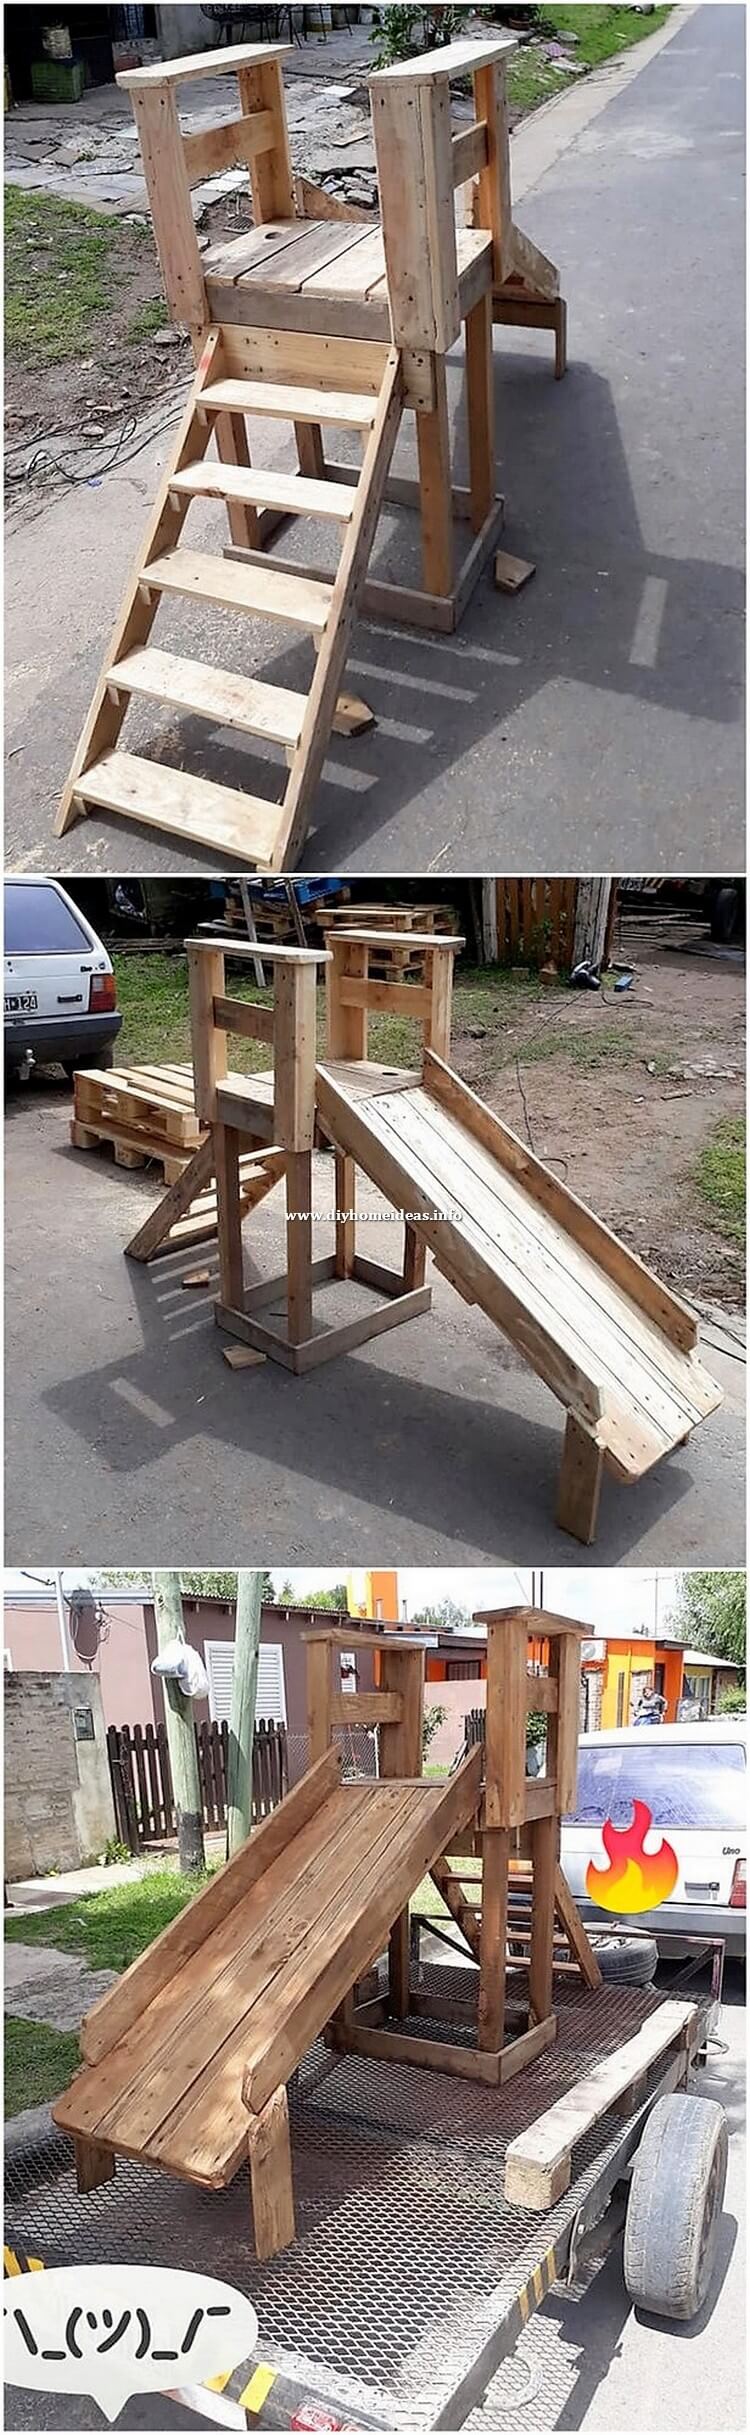 Pallet Play Creation for Kids